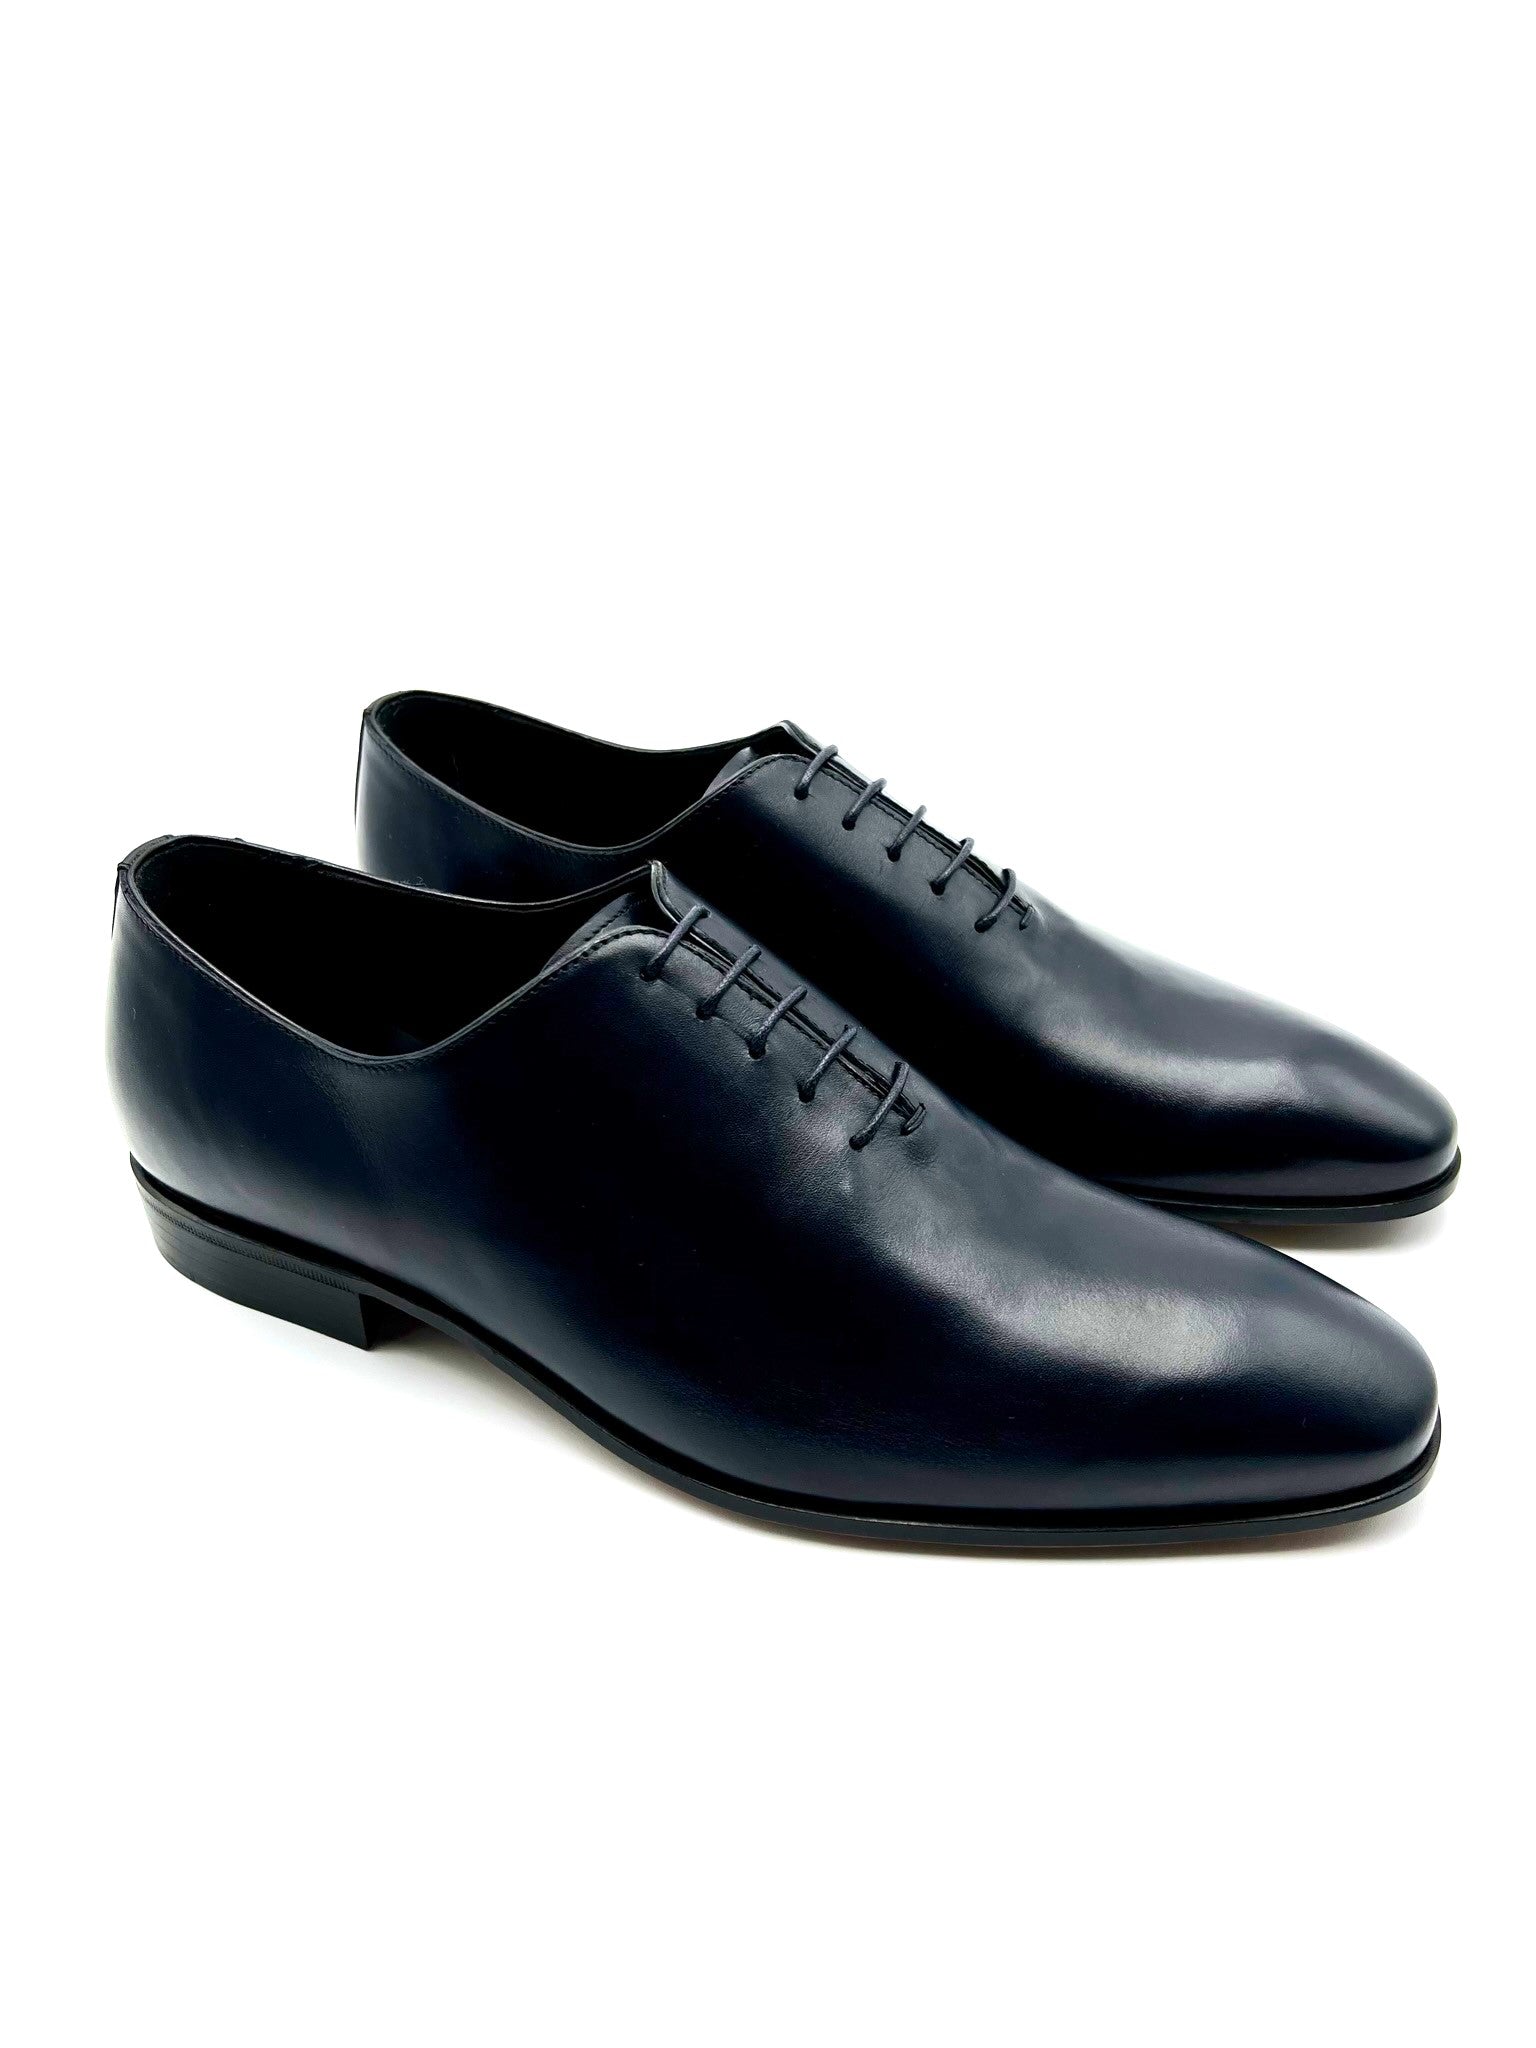 Oxford Whole cut, made of a single piece of leather,  without seams, in polished abrasive calfskin.  The Whole cut, has an elegant, clean appearance. Lightweight leather sole with non-slip insert sewn  to BLAKE. Made in Italy with genuine leather.Process: Blake /  Leather: calfskin / Color: dark blue / Lining: Black calf /  Insole: leather.Handcrafted shoes, made in Italy with  genuine 100%Italian leather - Sartoria Dei Duchi-Atri